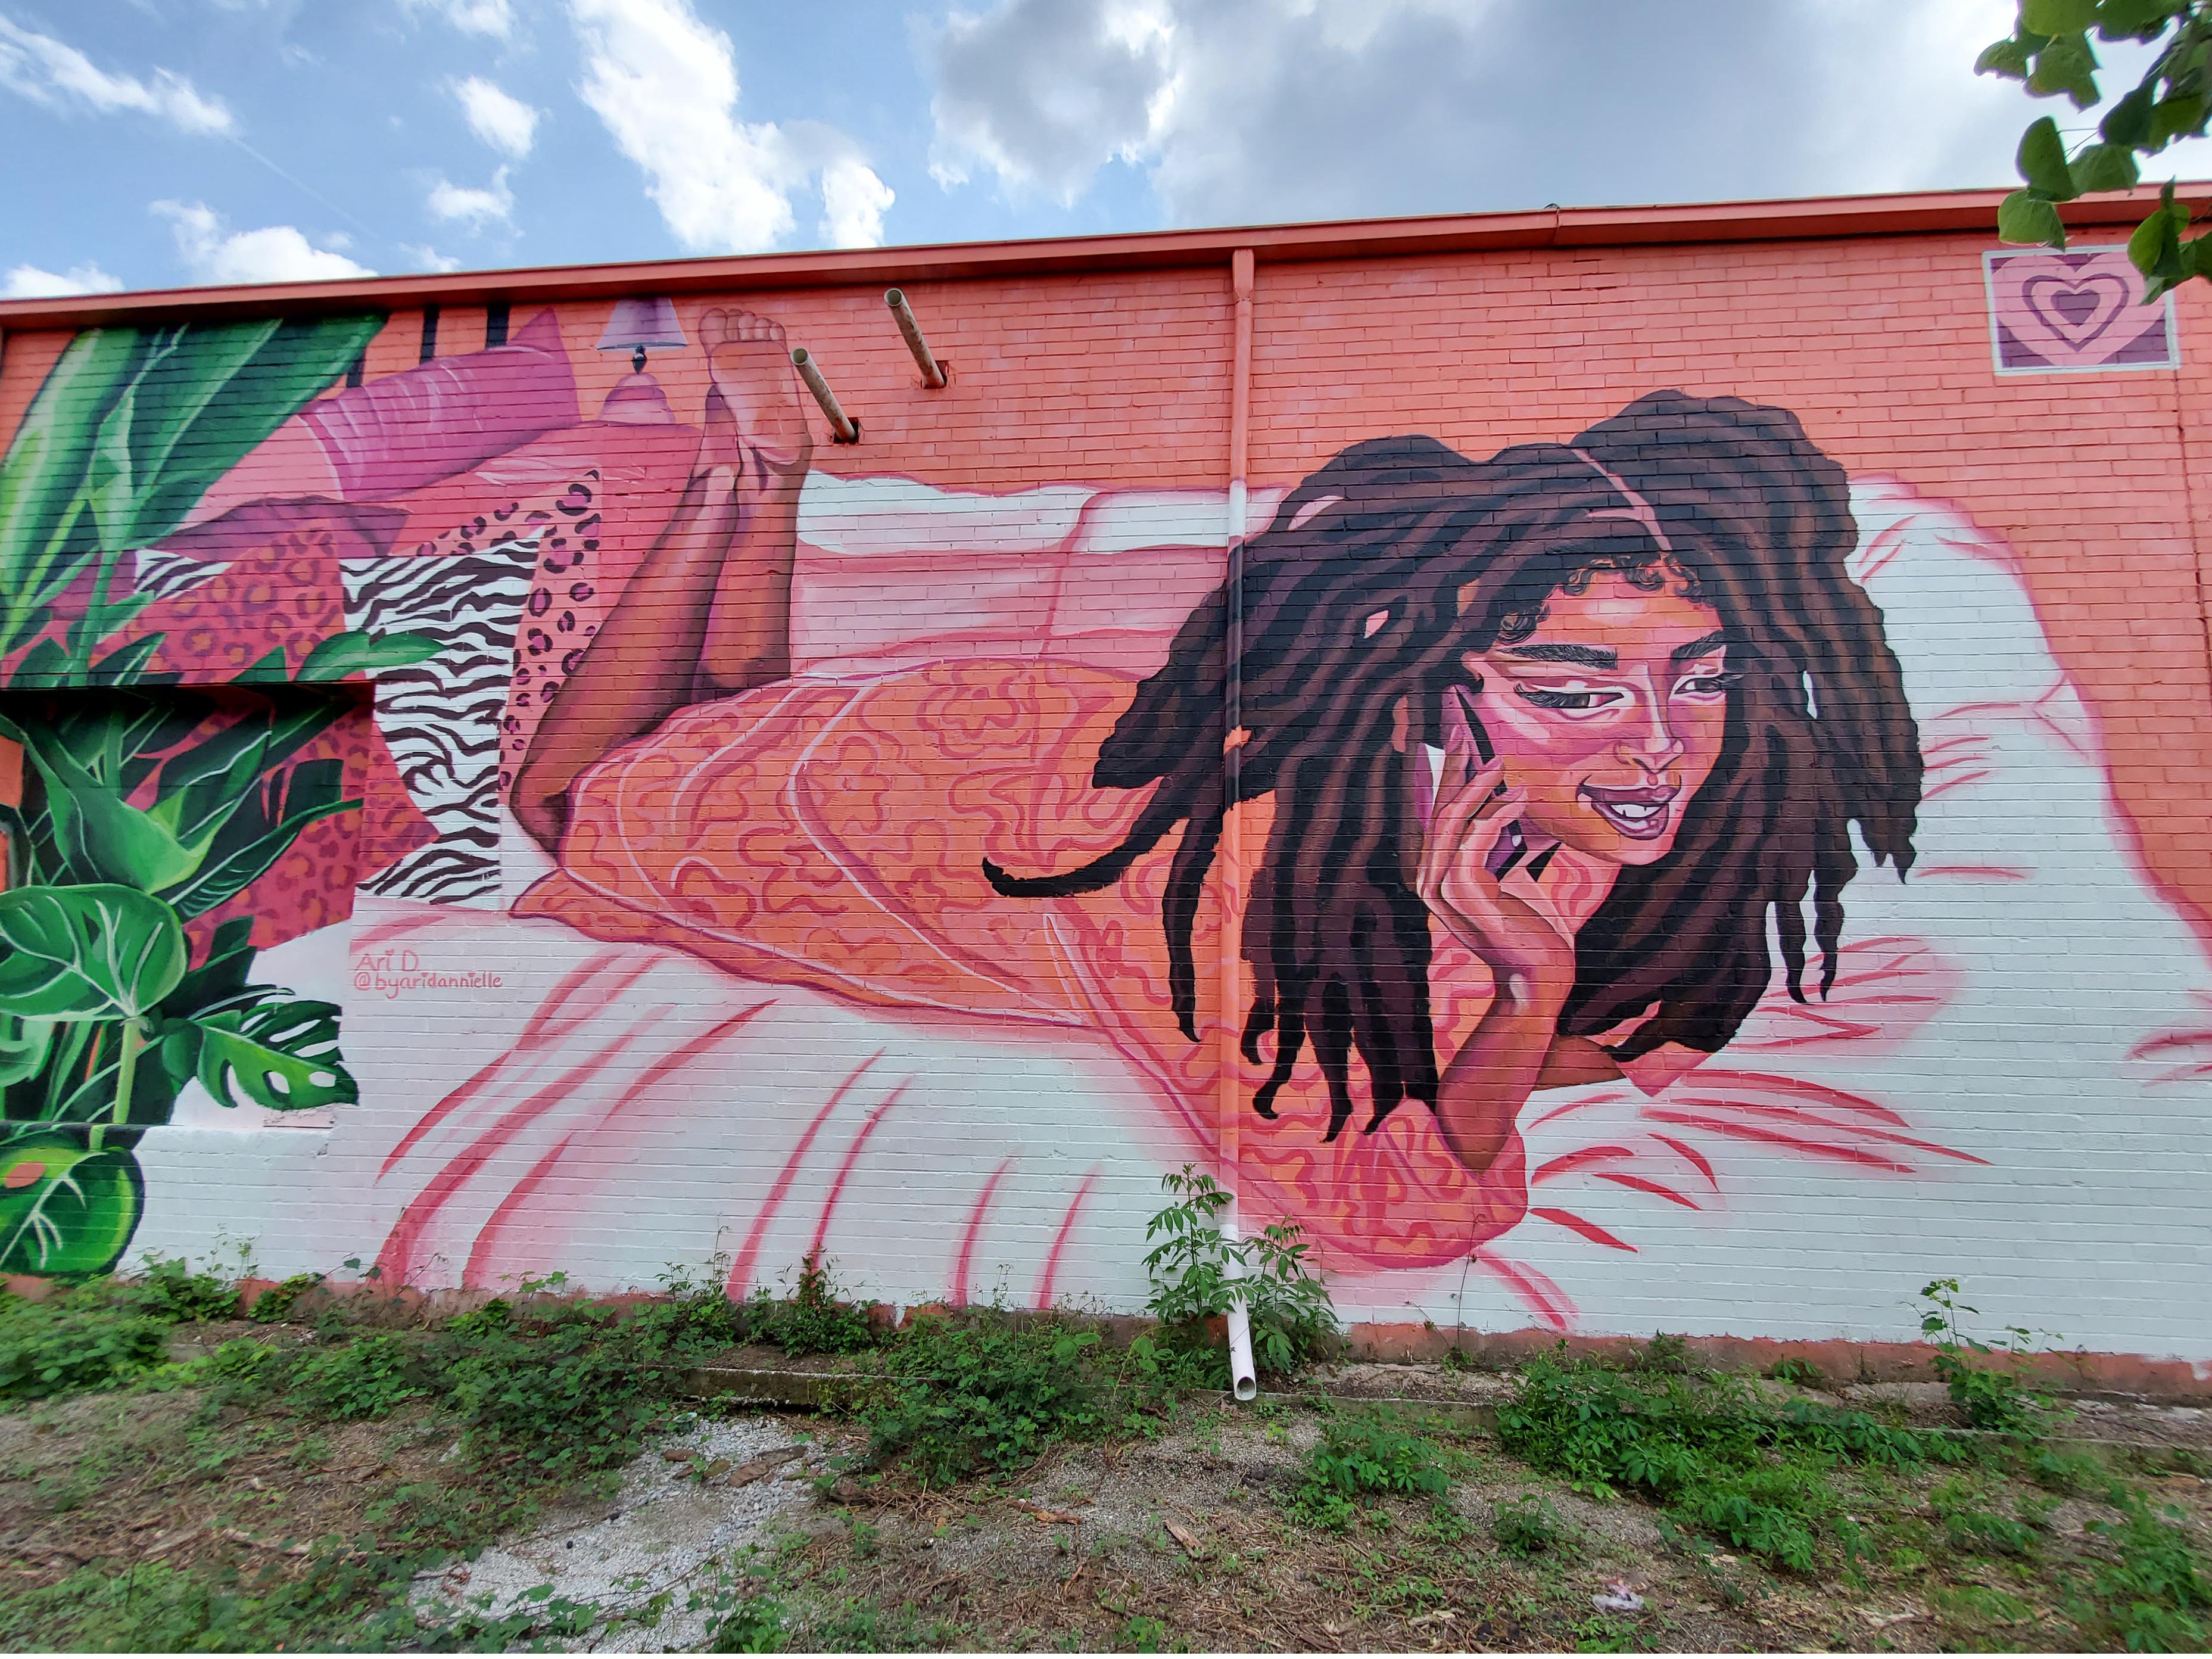 Ariel Daniel tells a positive story of a black woman's daily life in her mural 